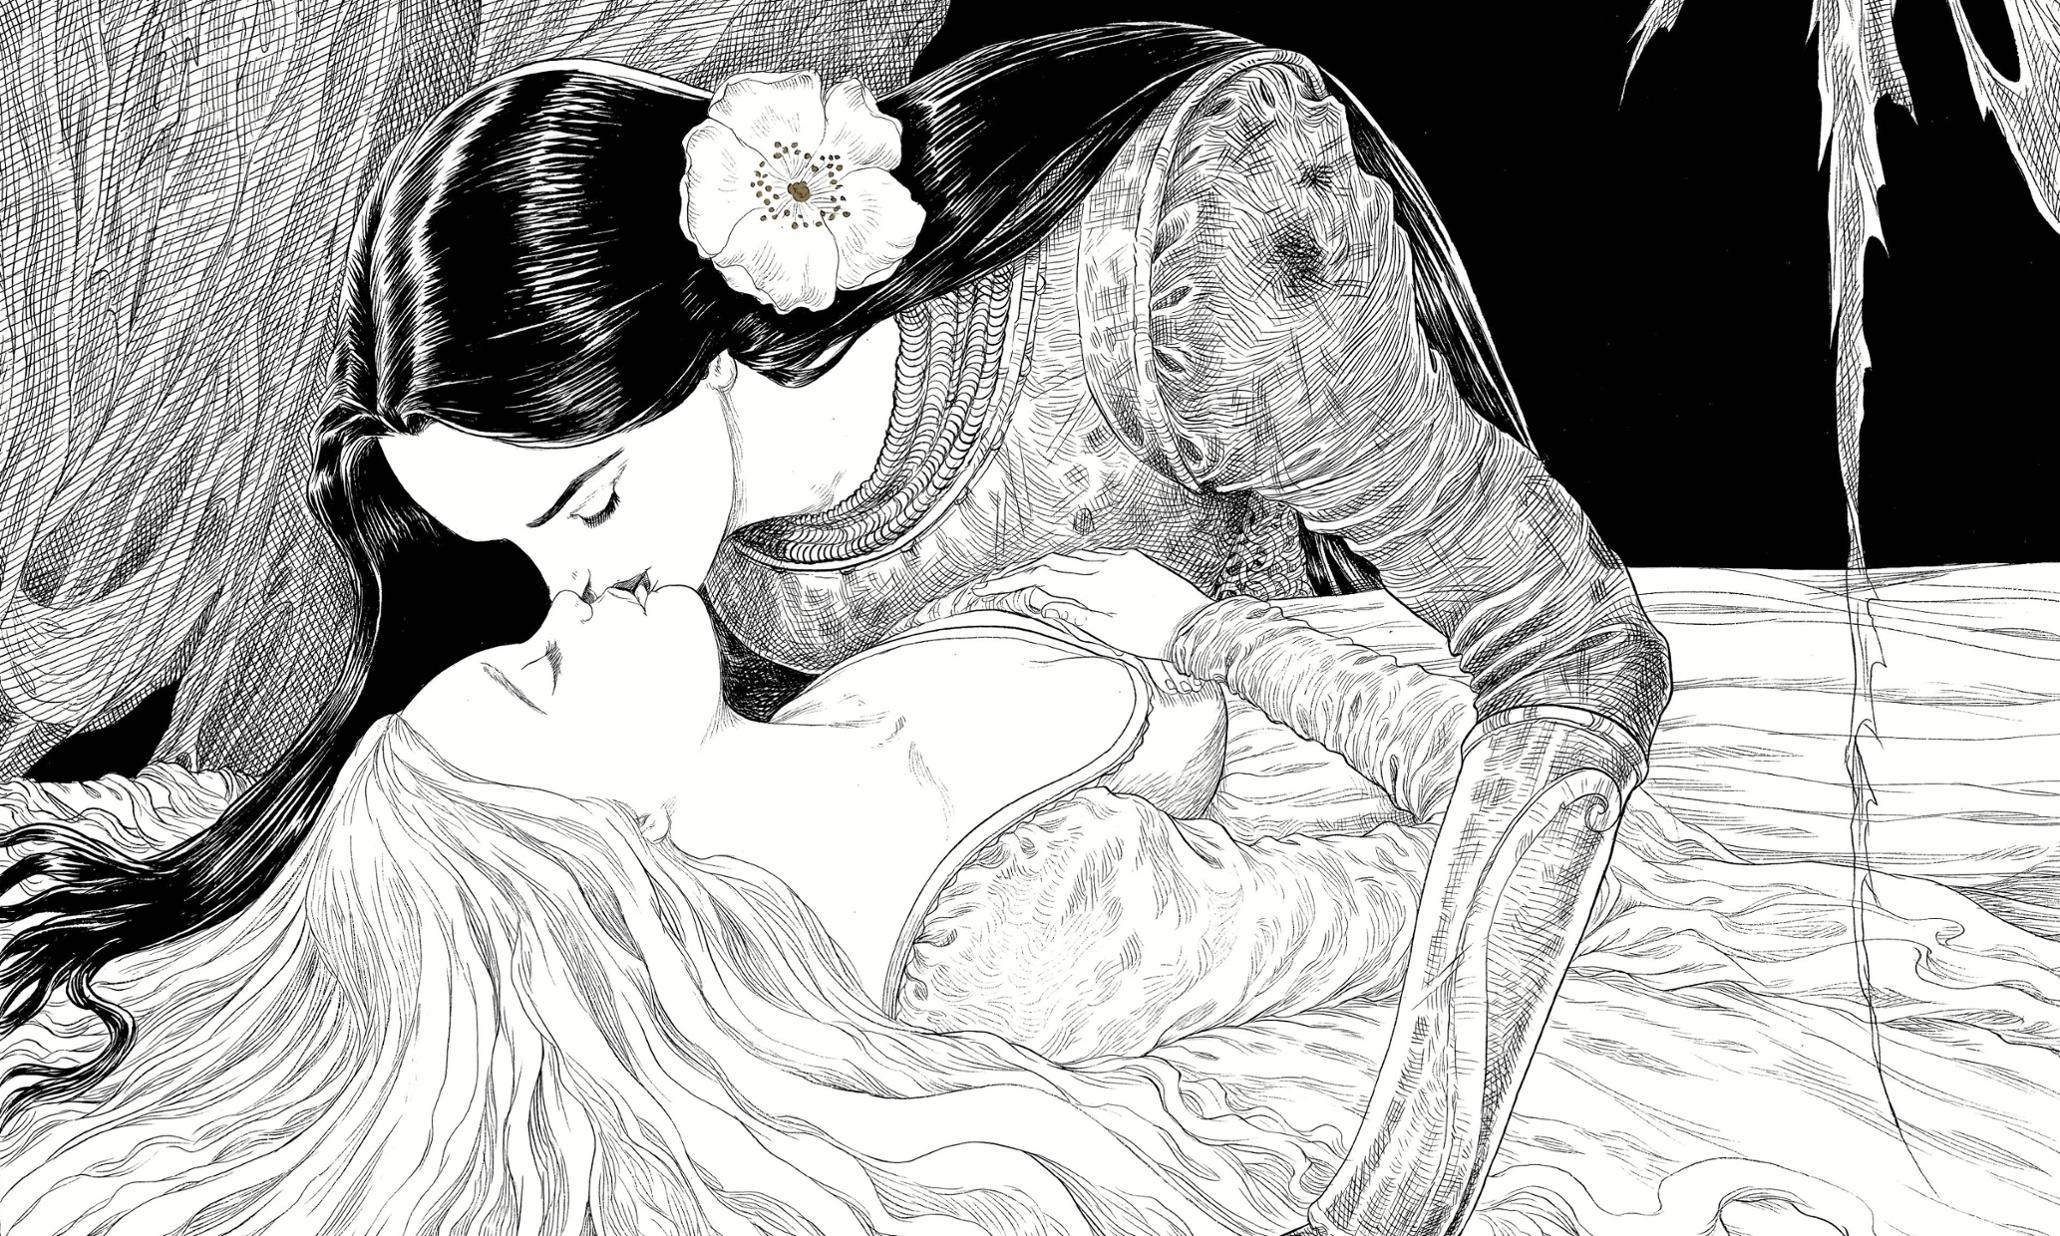 And Then The Queen Kissed The Princess Fairytales Get A Modern Makeover Books The Guardian